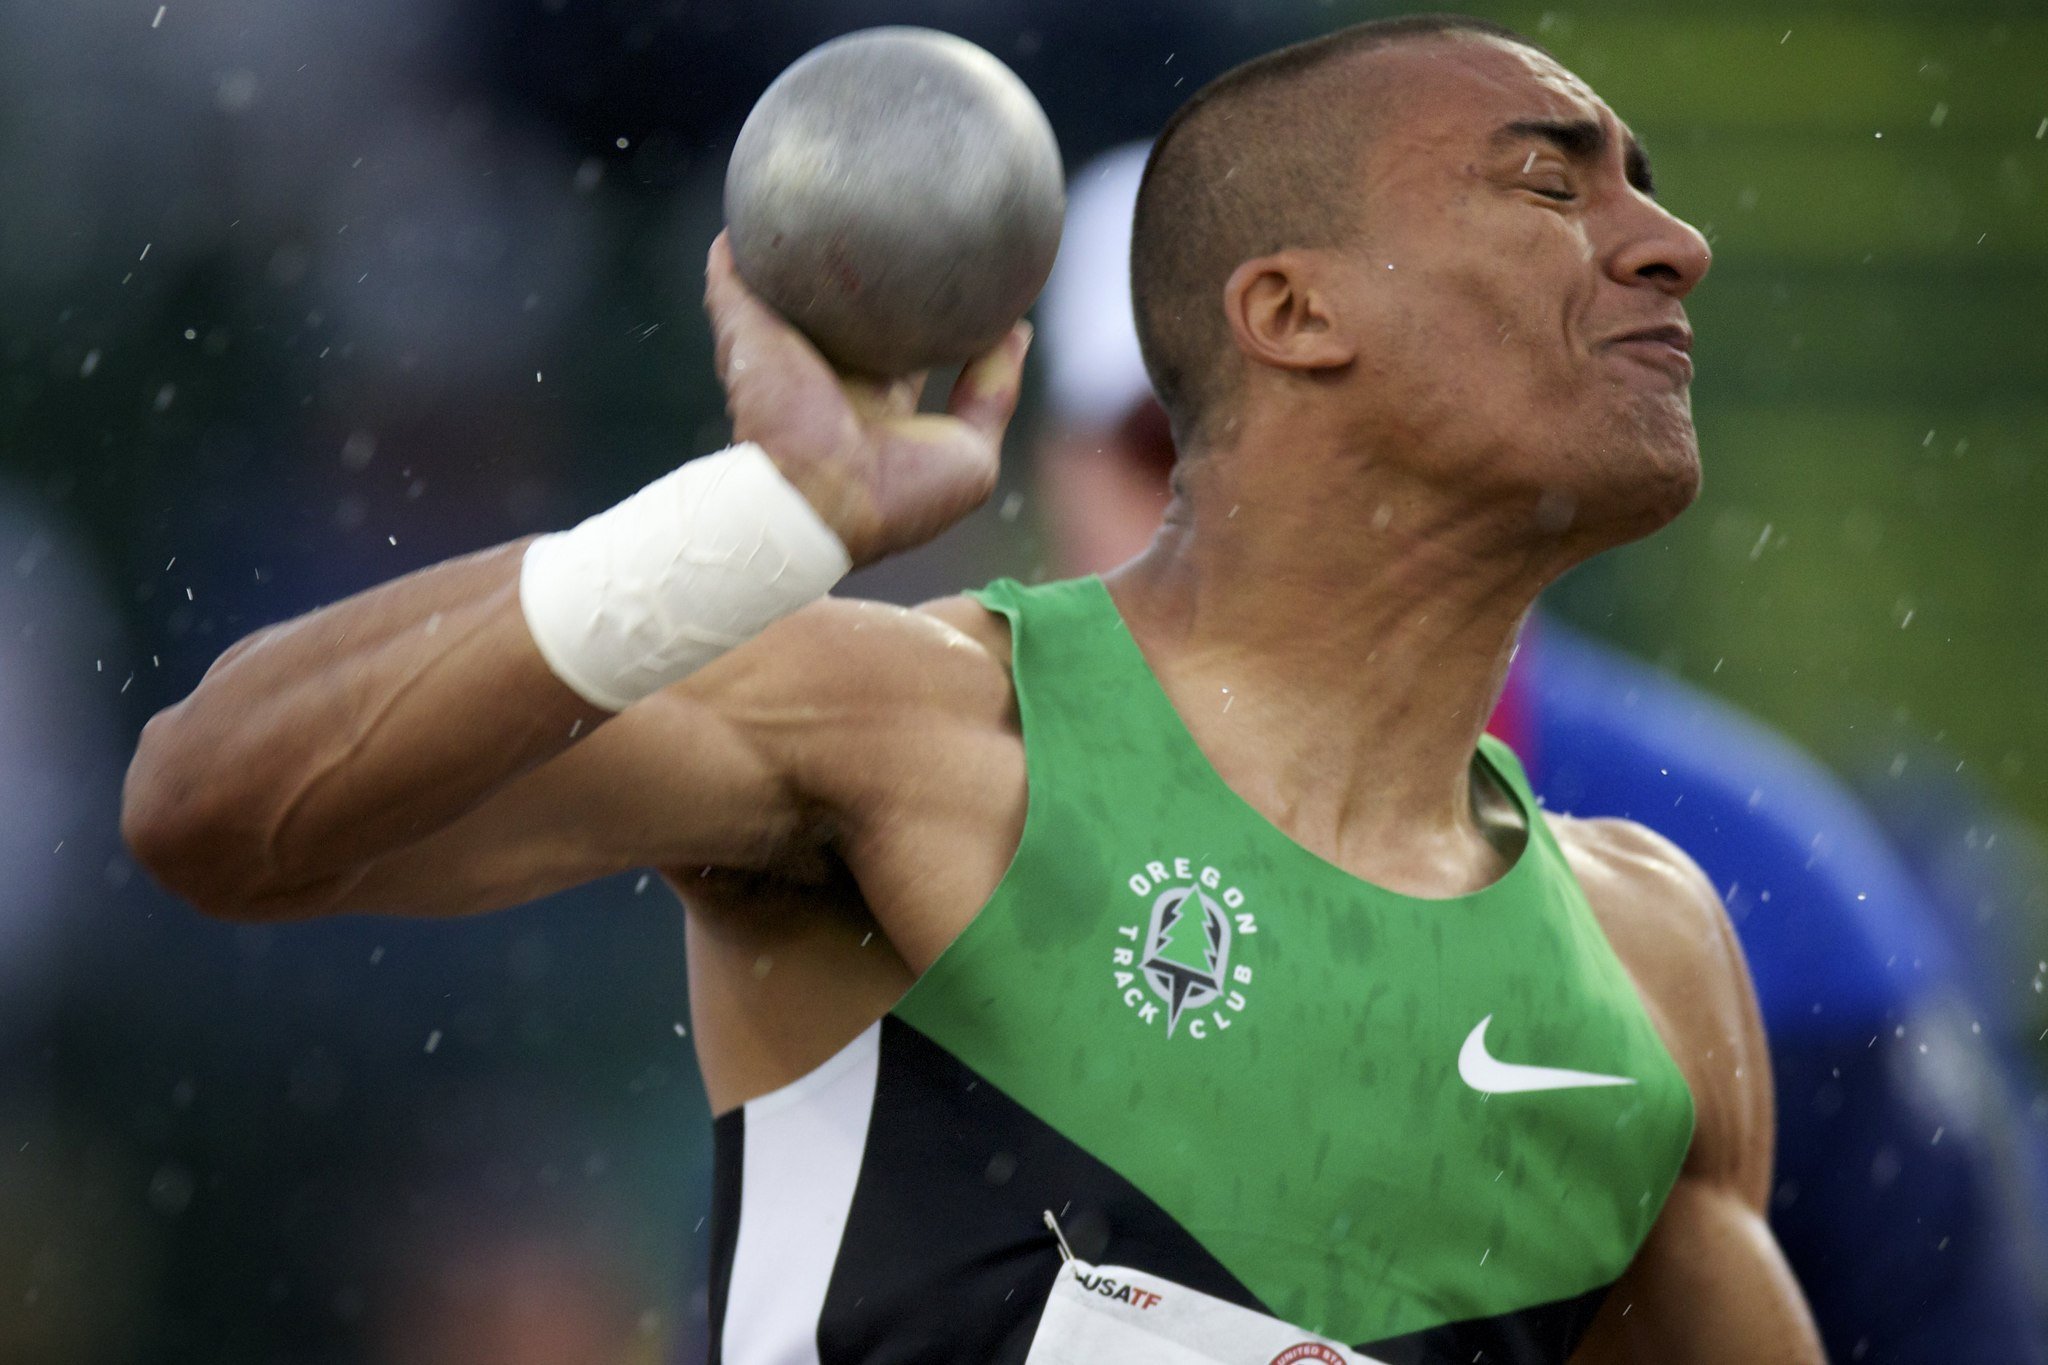 Ashton Eaton Currently in Second Place at USA Championships